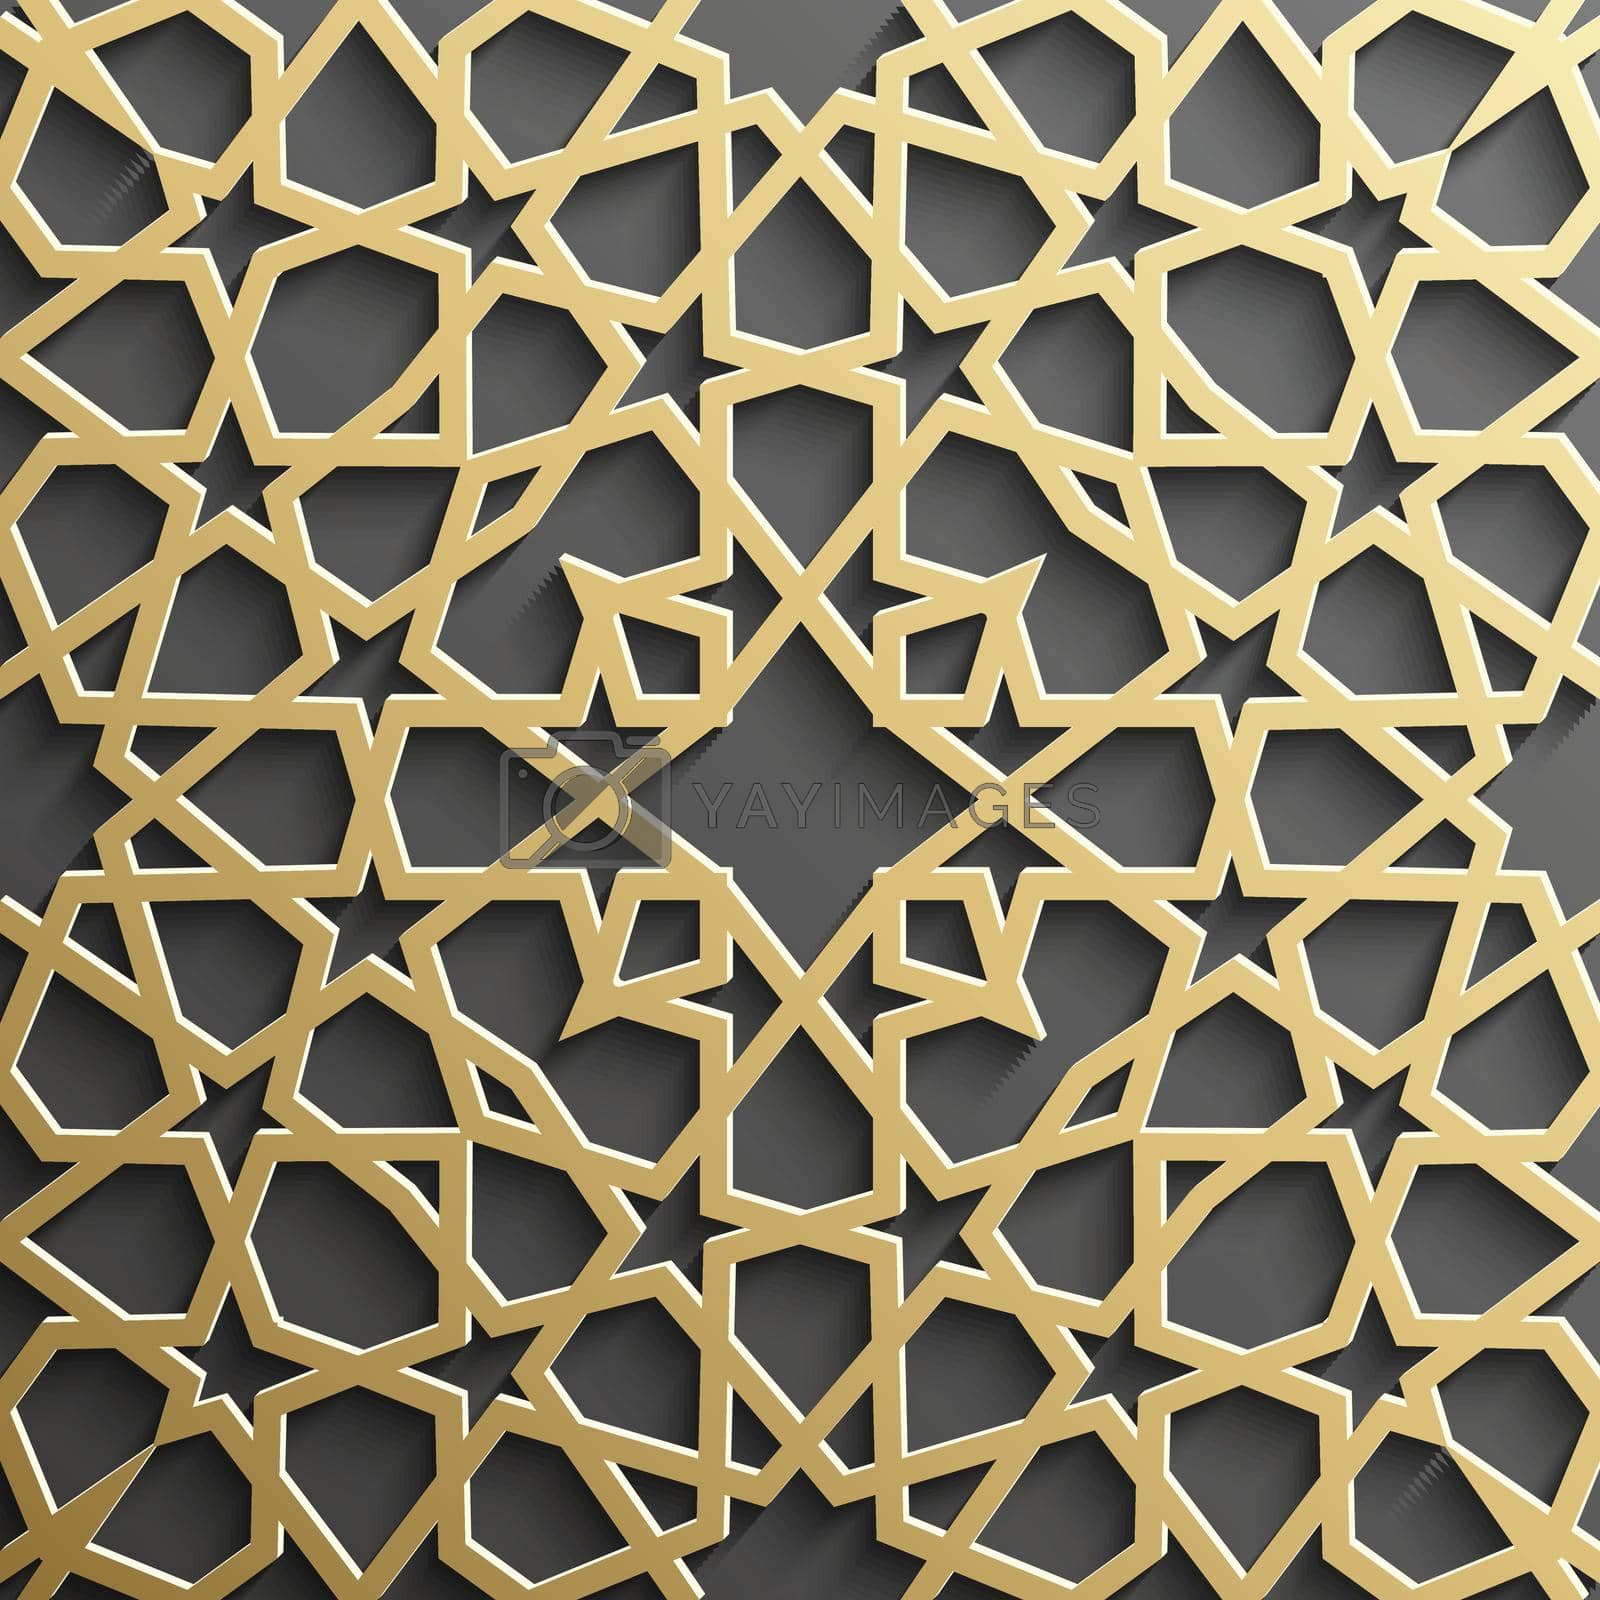 Royalty free image of Background with gold seamless pattern on black backgroud in islamic style. by DmytroRazinkov